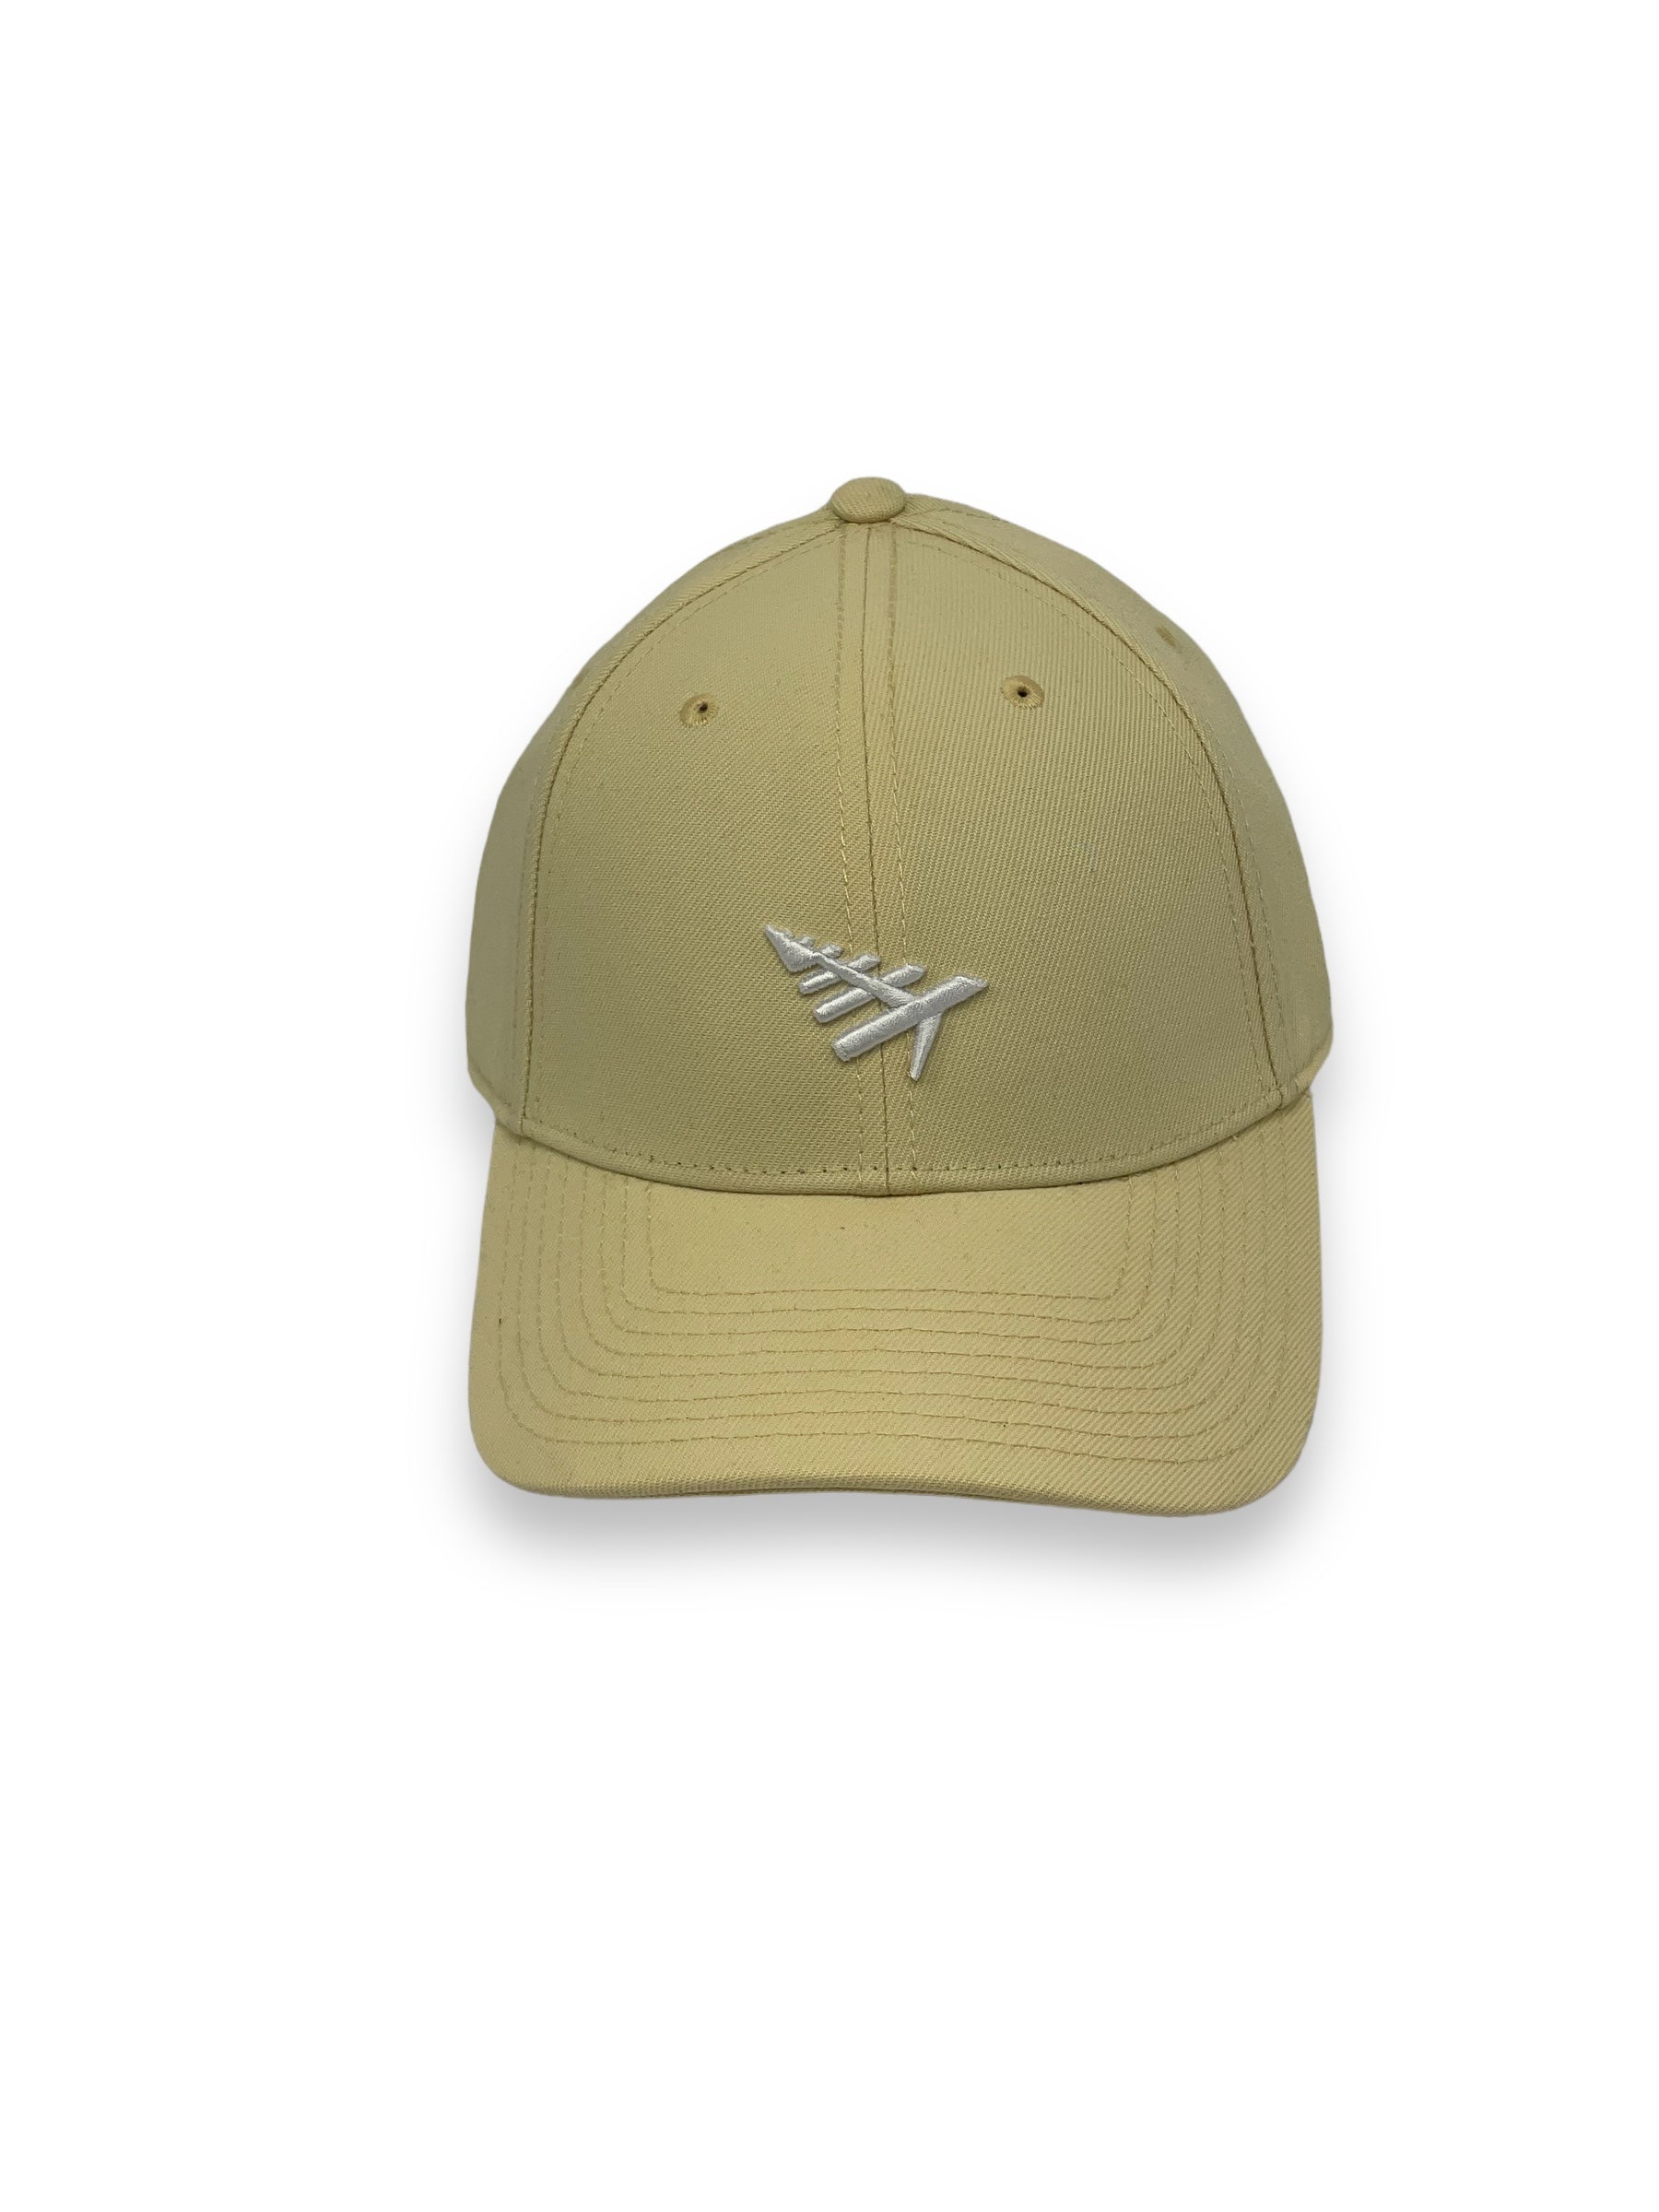 PAPER PLANES ICON II DAD HAT (SAND)